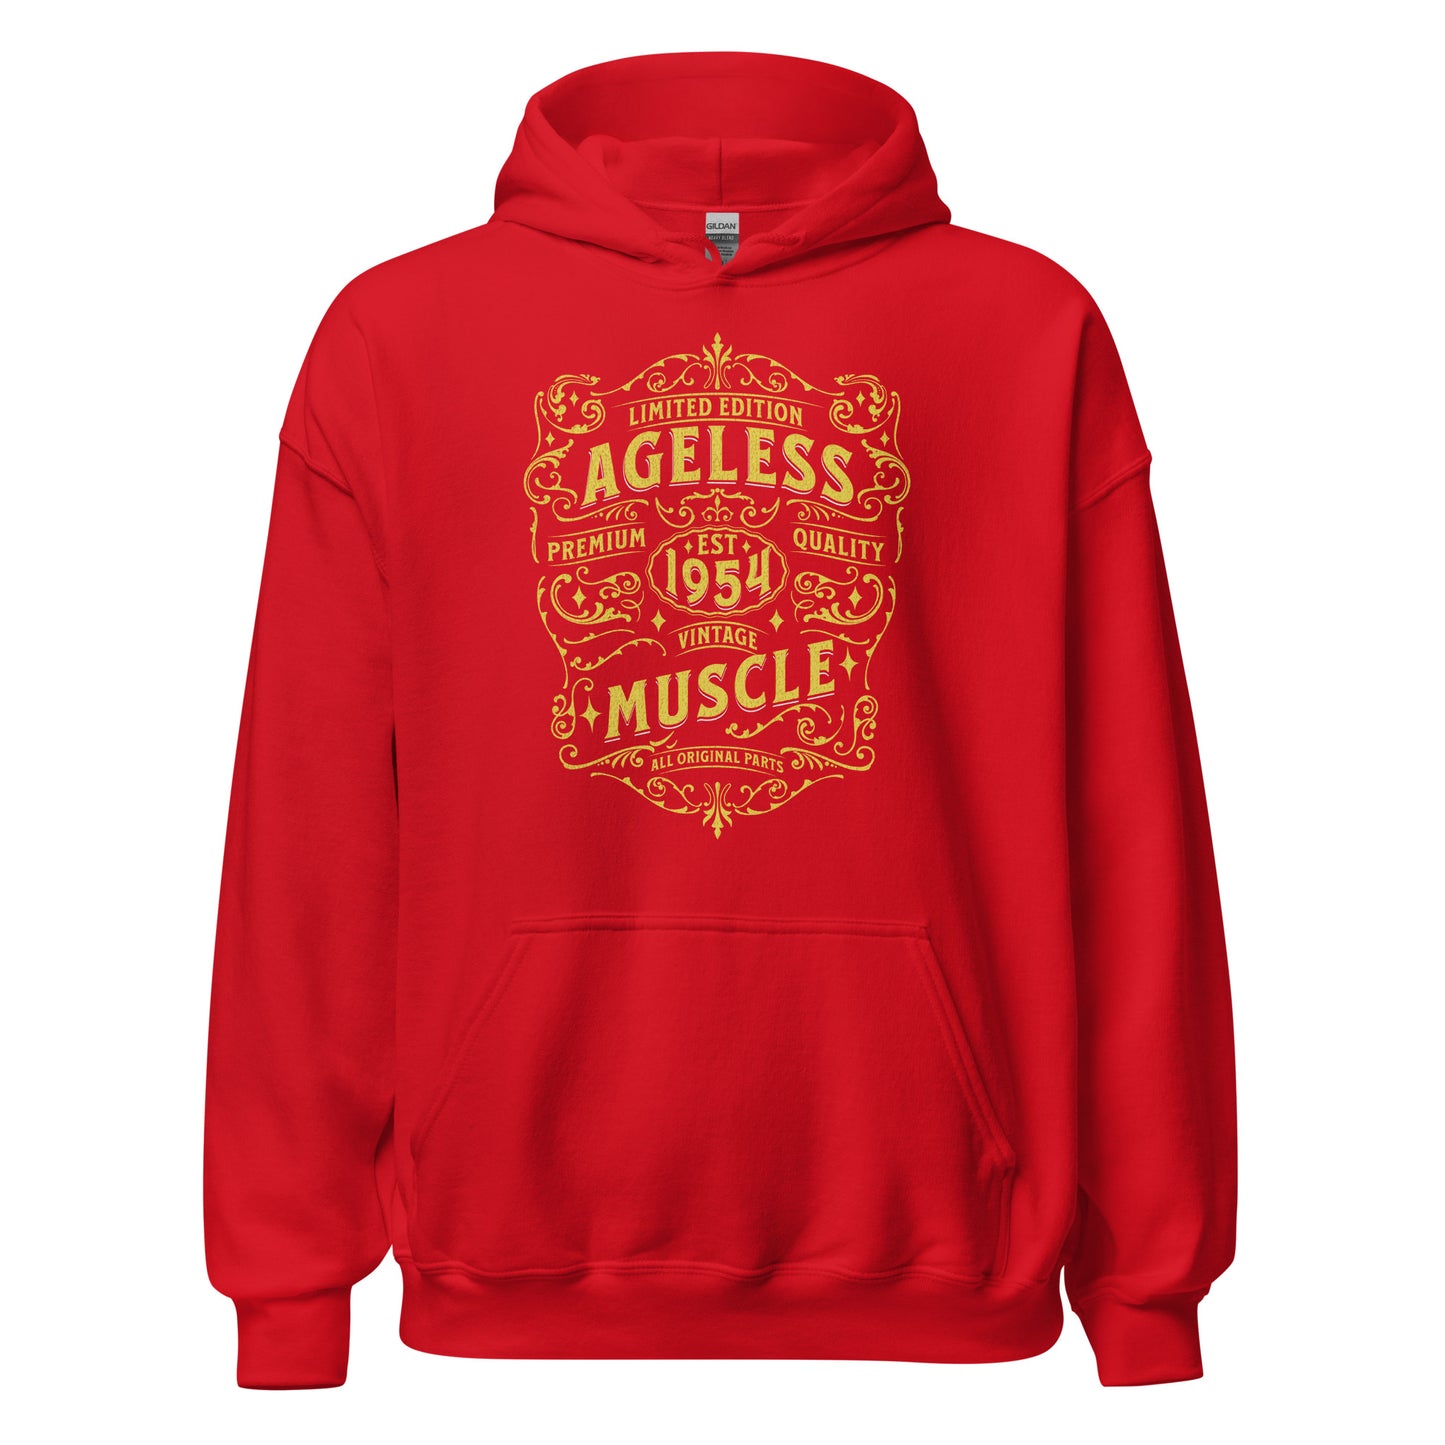 Ageless Muscle: Limited Edition Unisex Hoodie